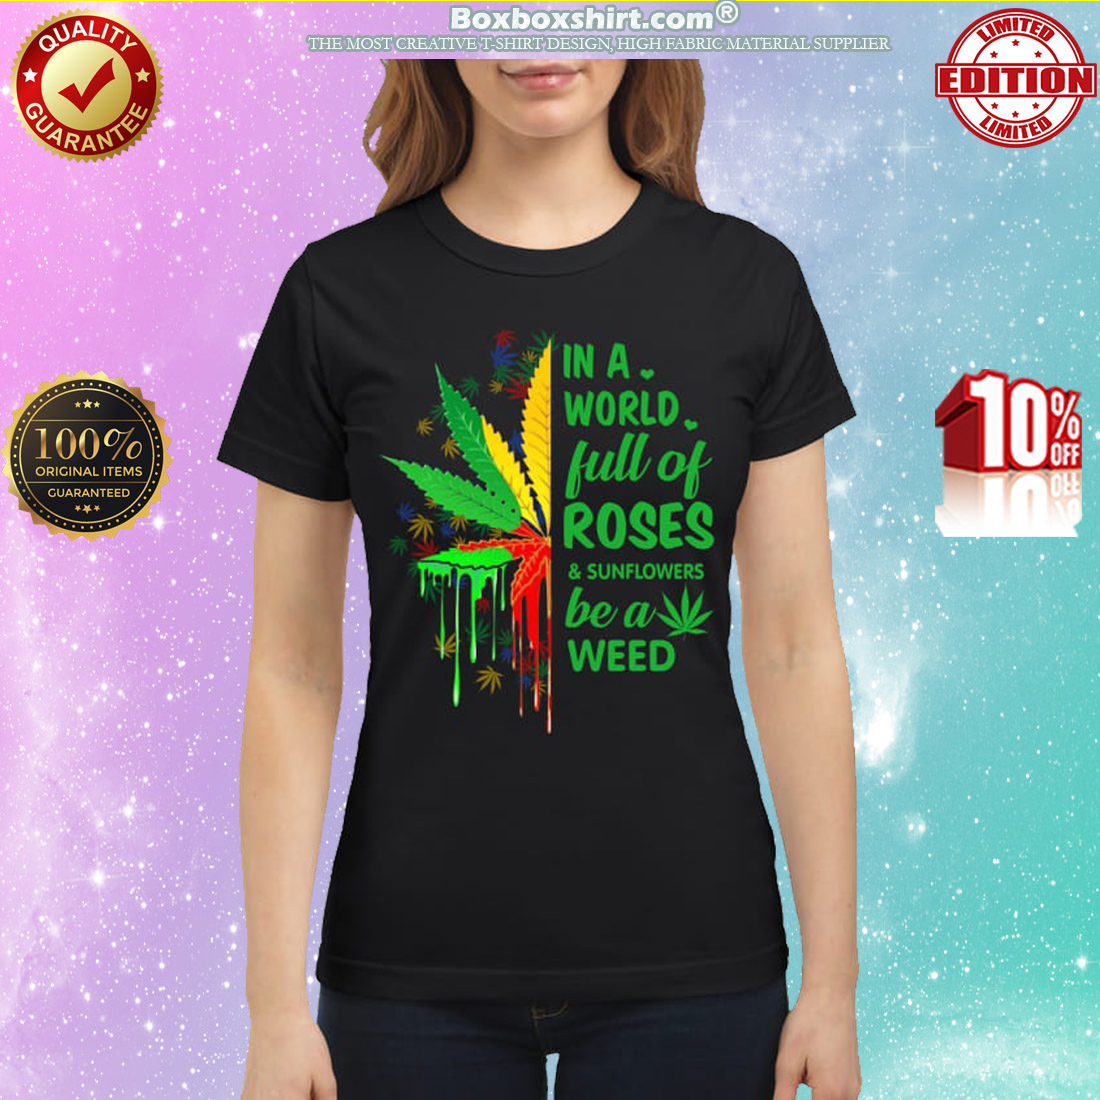 In a world full of roses and sunflowers be a weed classic shirt